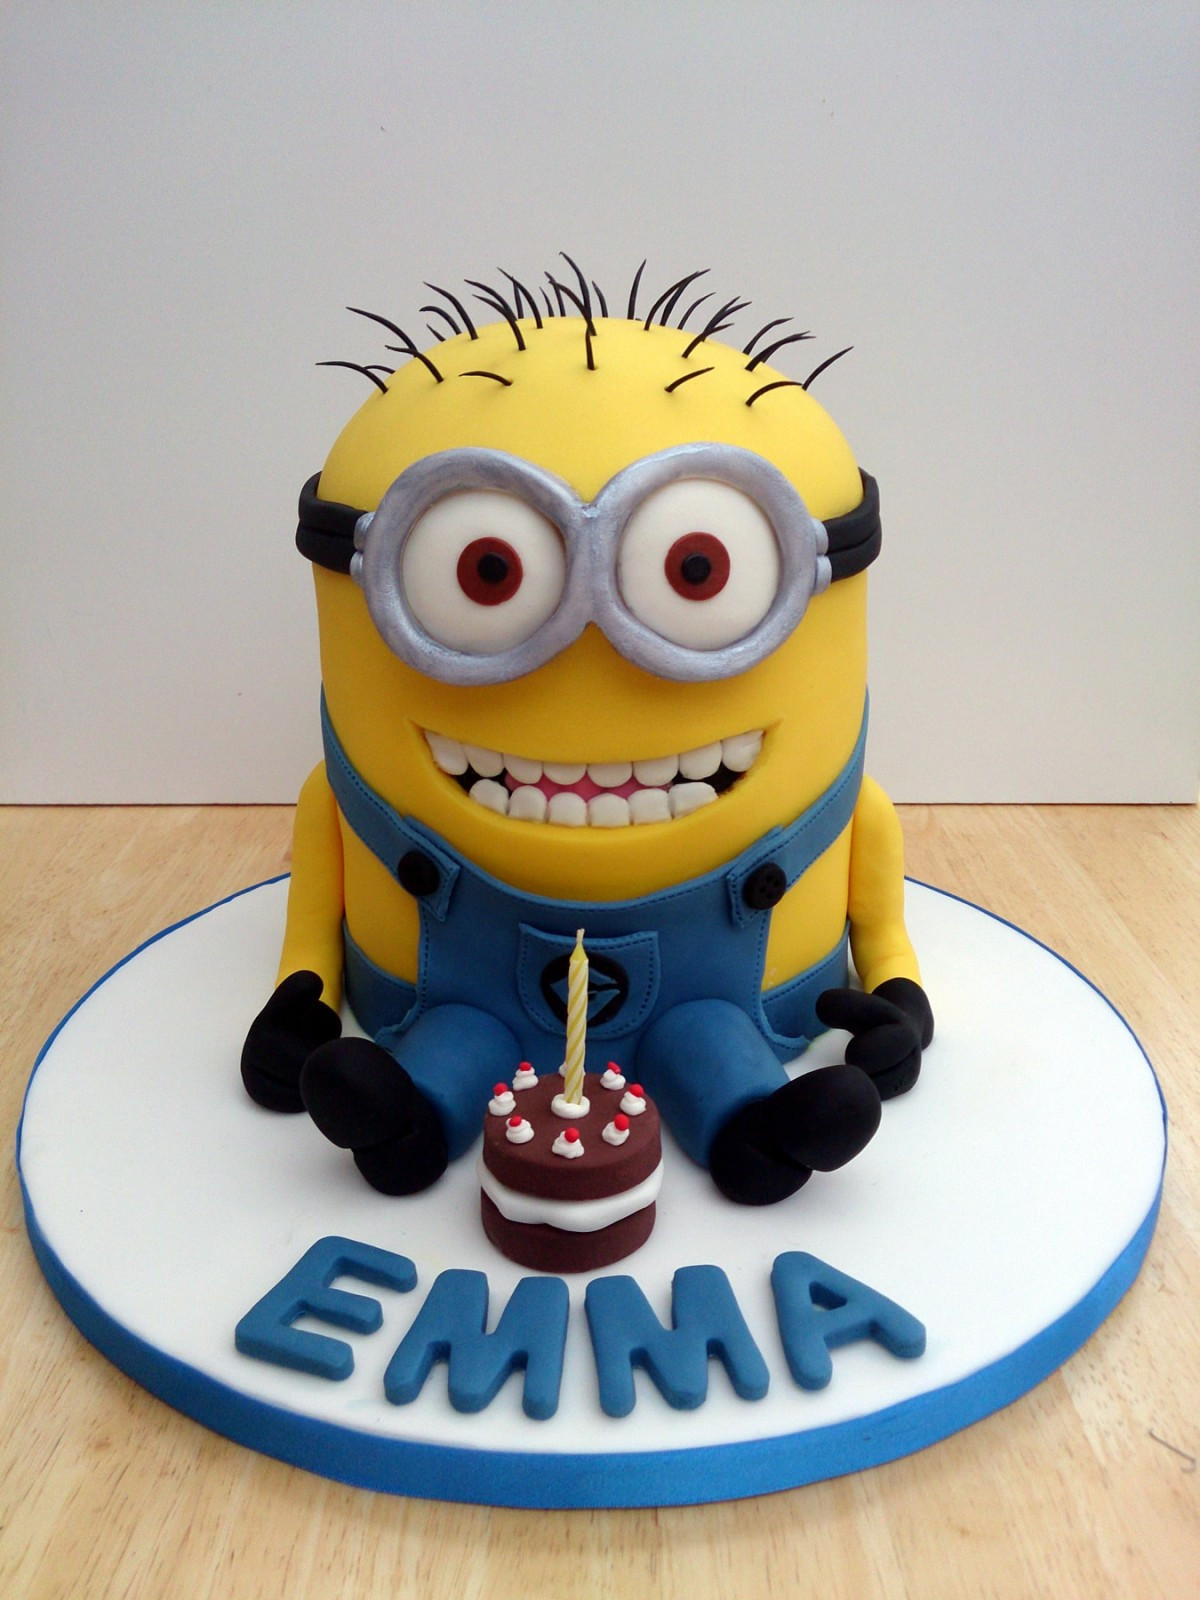 Despicable Me Birthday Cake
 Despicable Me Minion with Teeth Novelty Birthday Cake